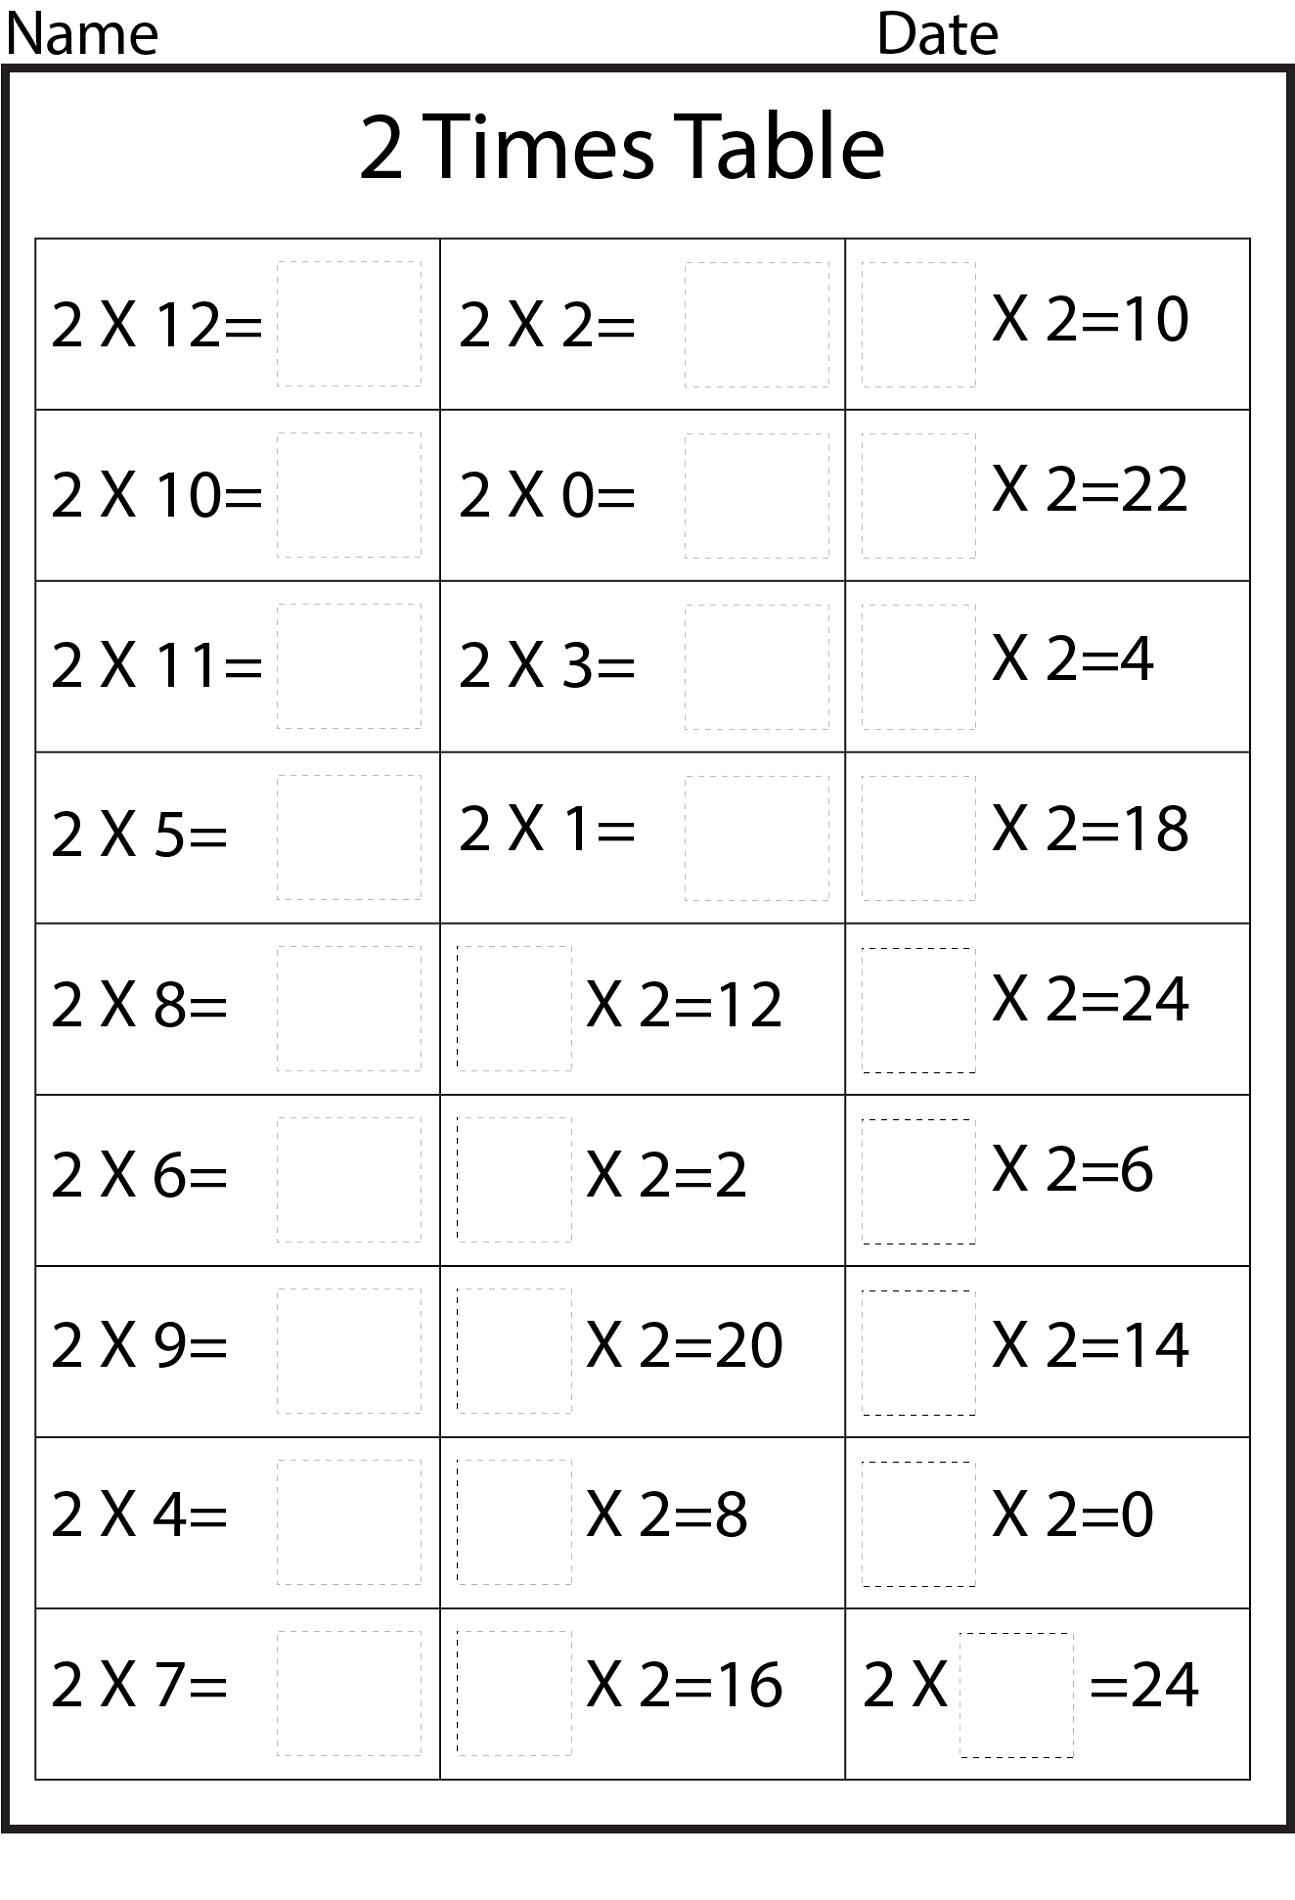 Printable 20 Times Table Worksheets  Activity Shelter With Regard To 2 Times Table Worksheet